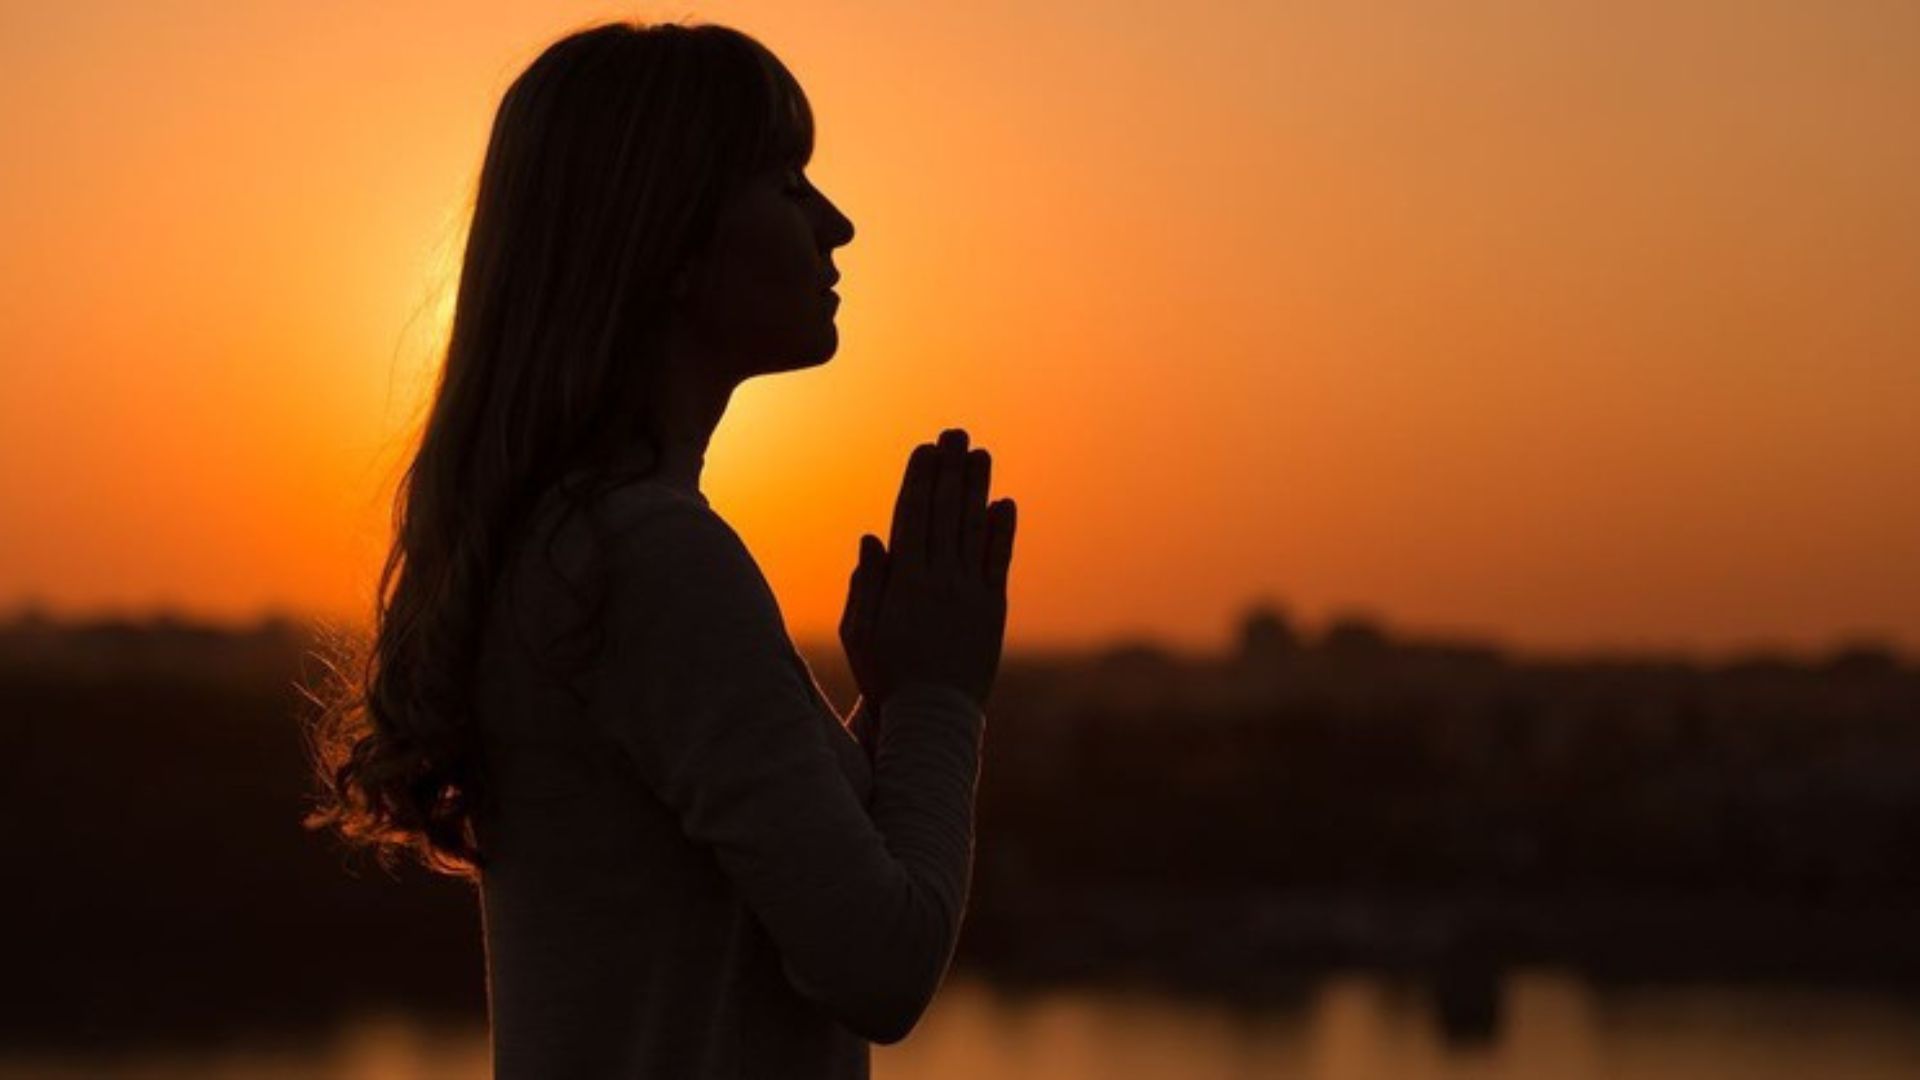 A Woman Praying At The Time Of Sunset